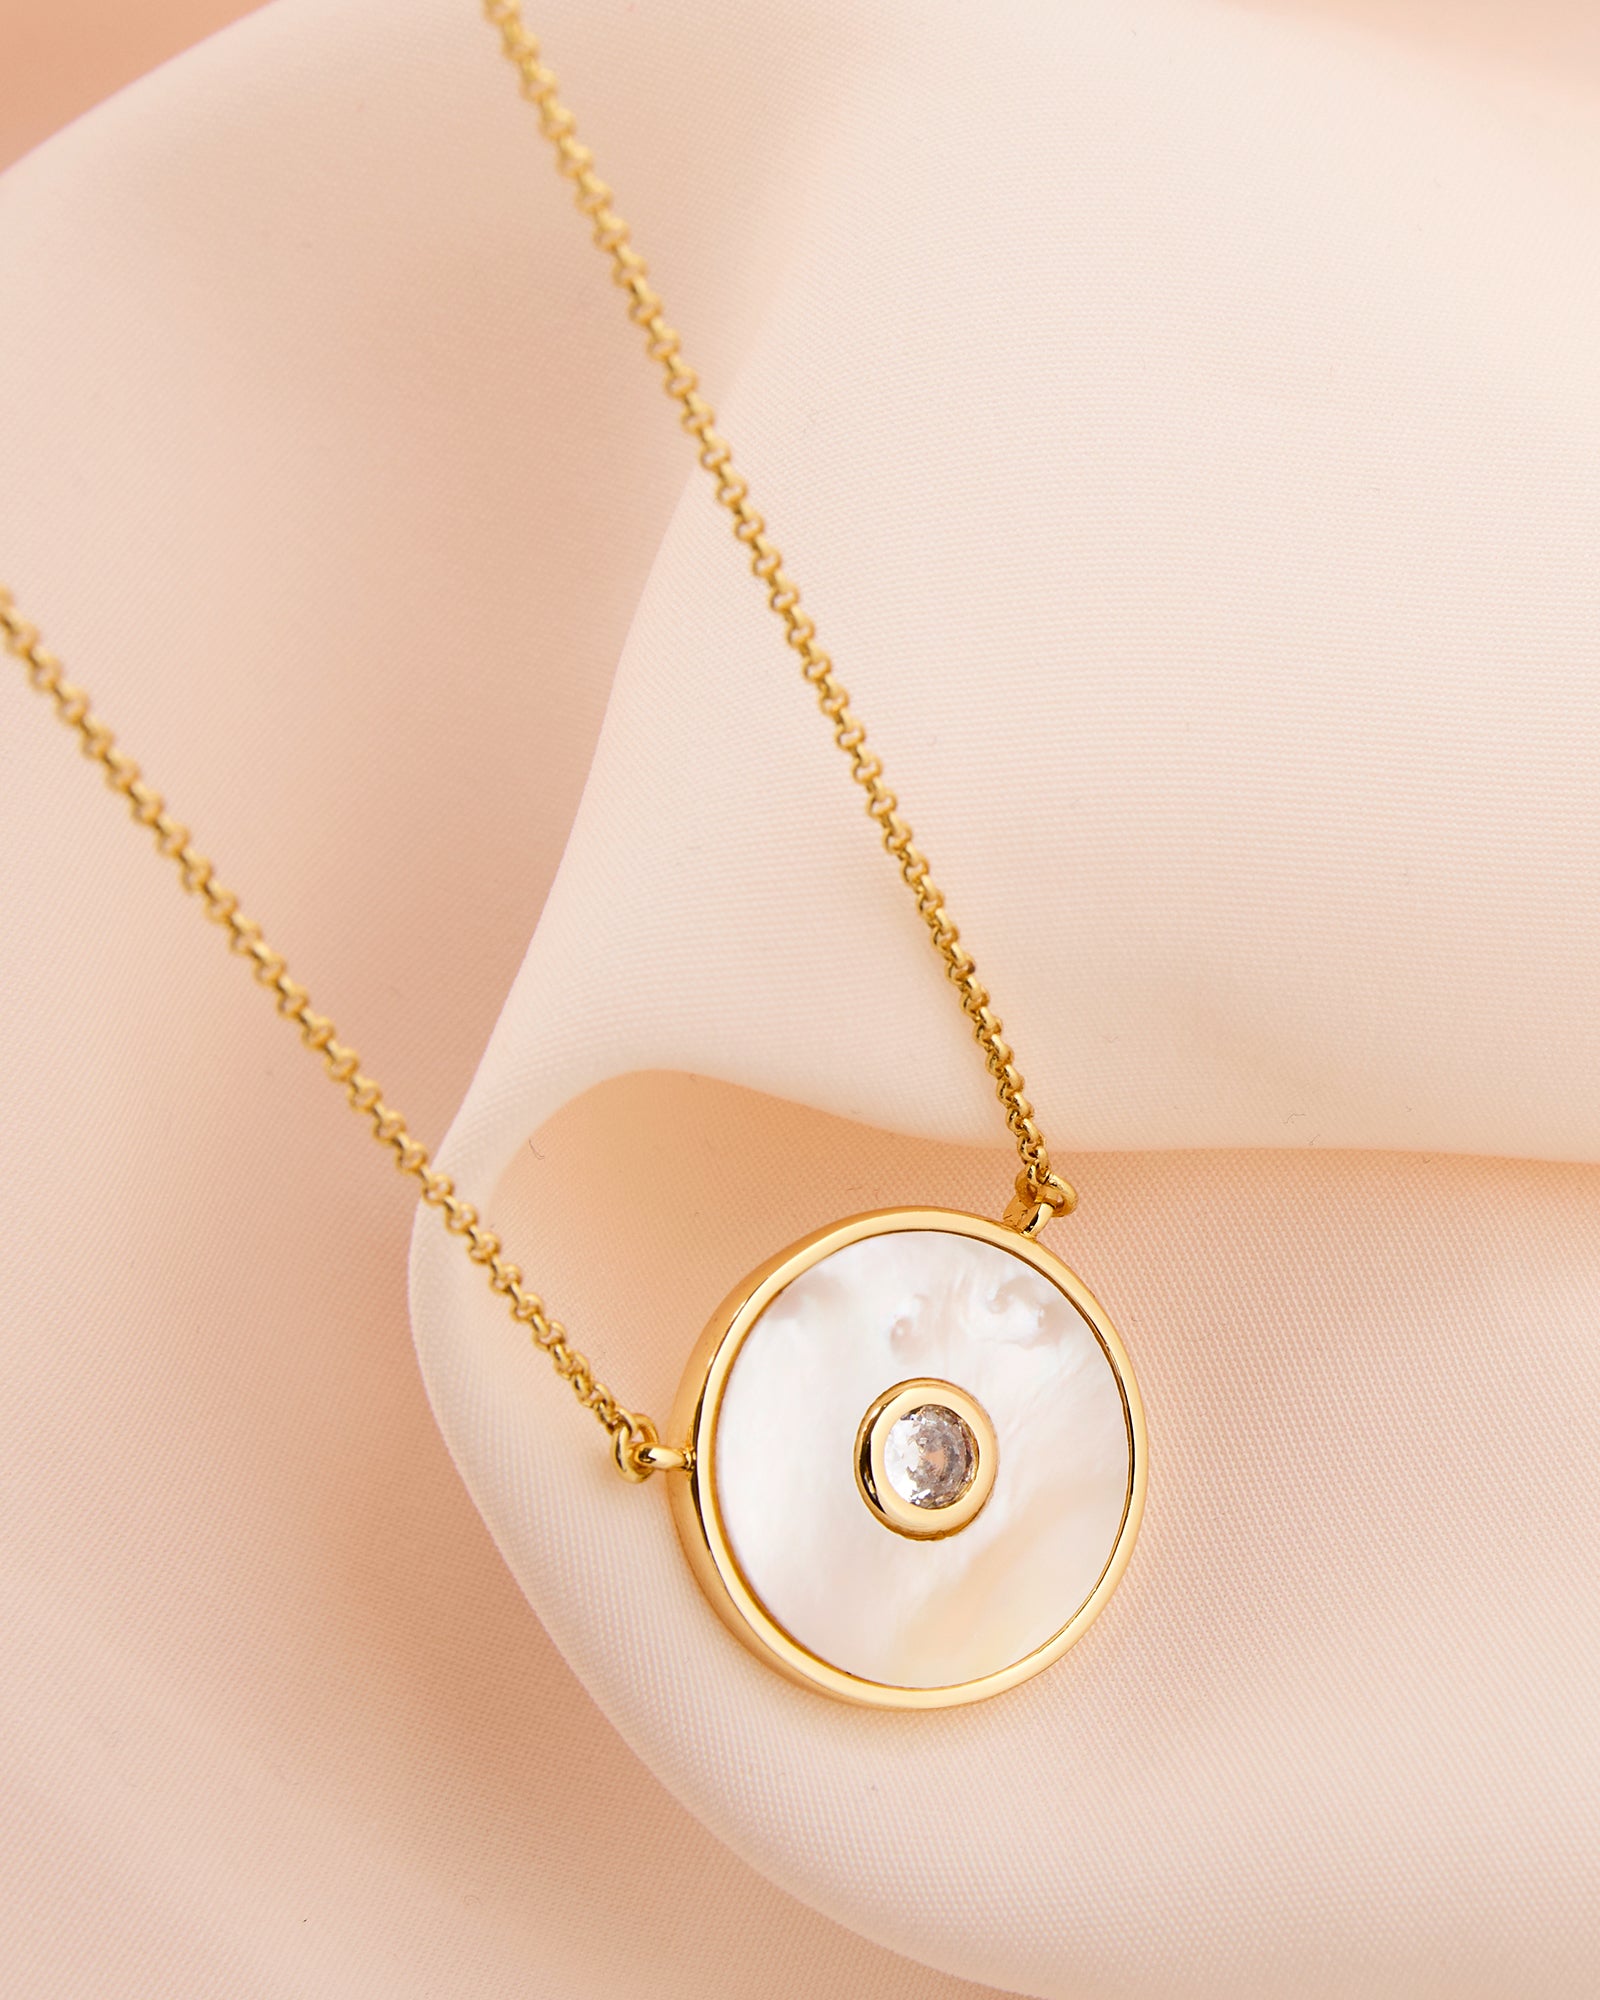 Gold chain necklace with circle pendant